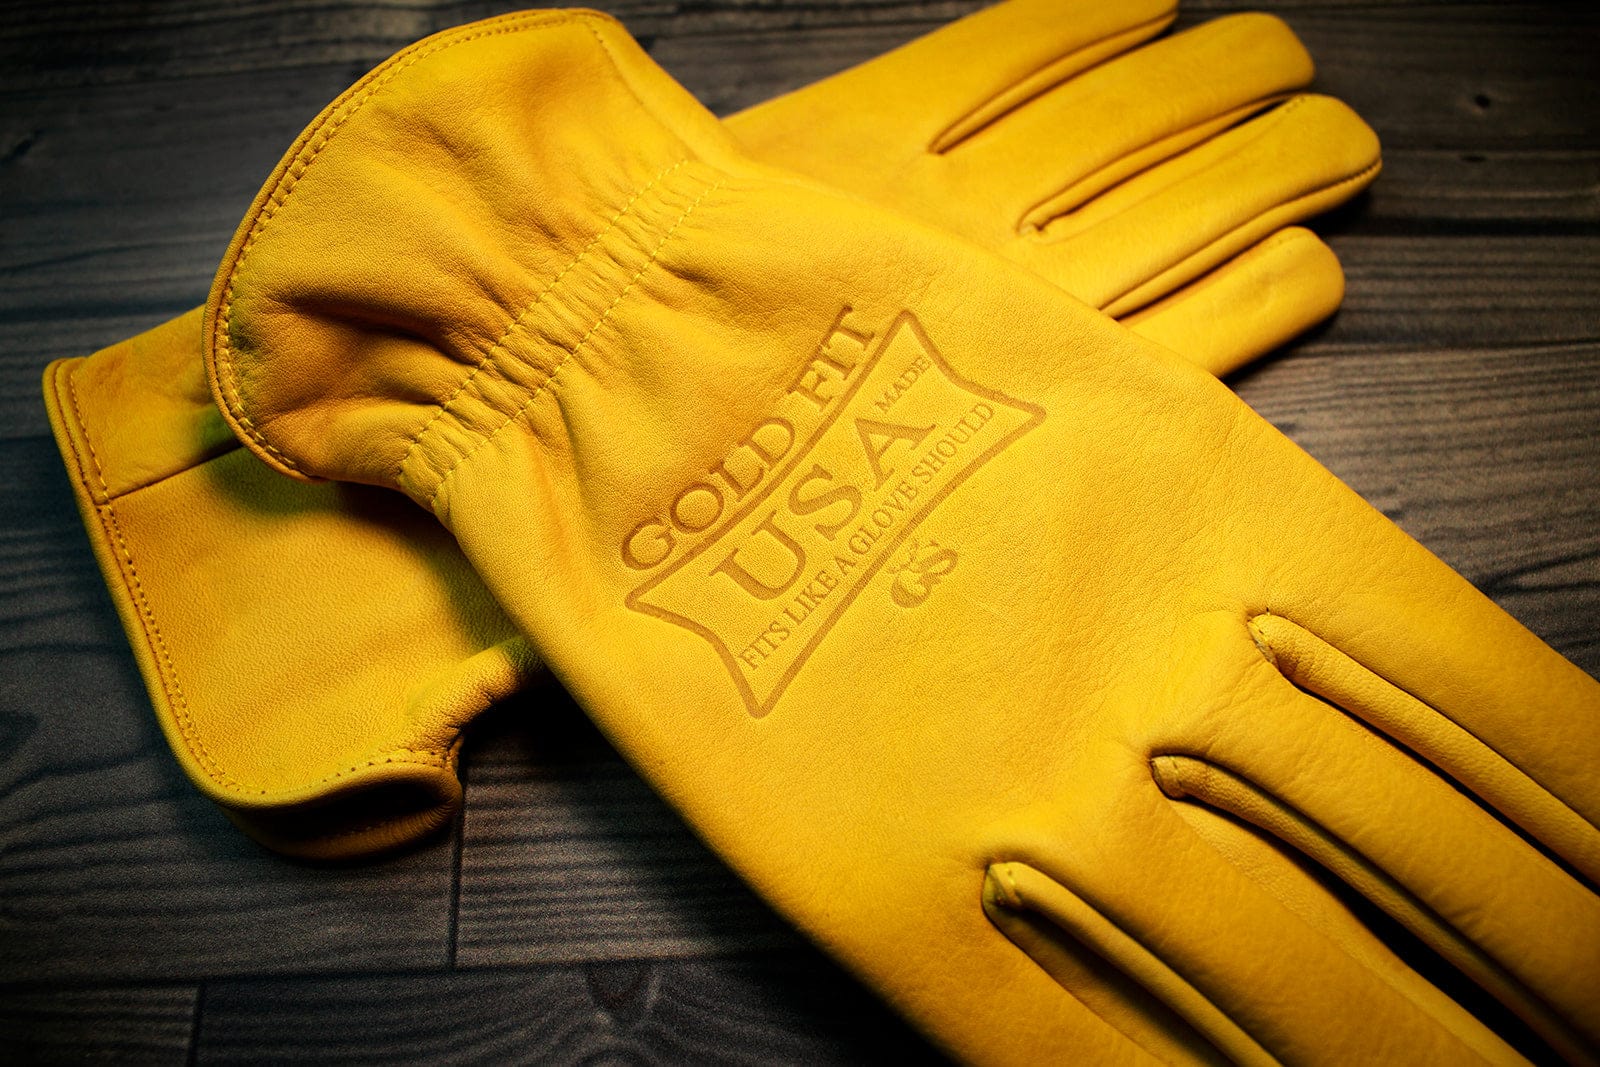 Made in the USA Leather Work Glove 250 Golden Stag Gloves